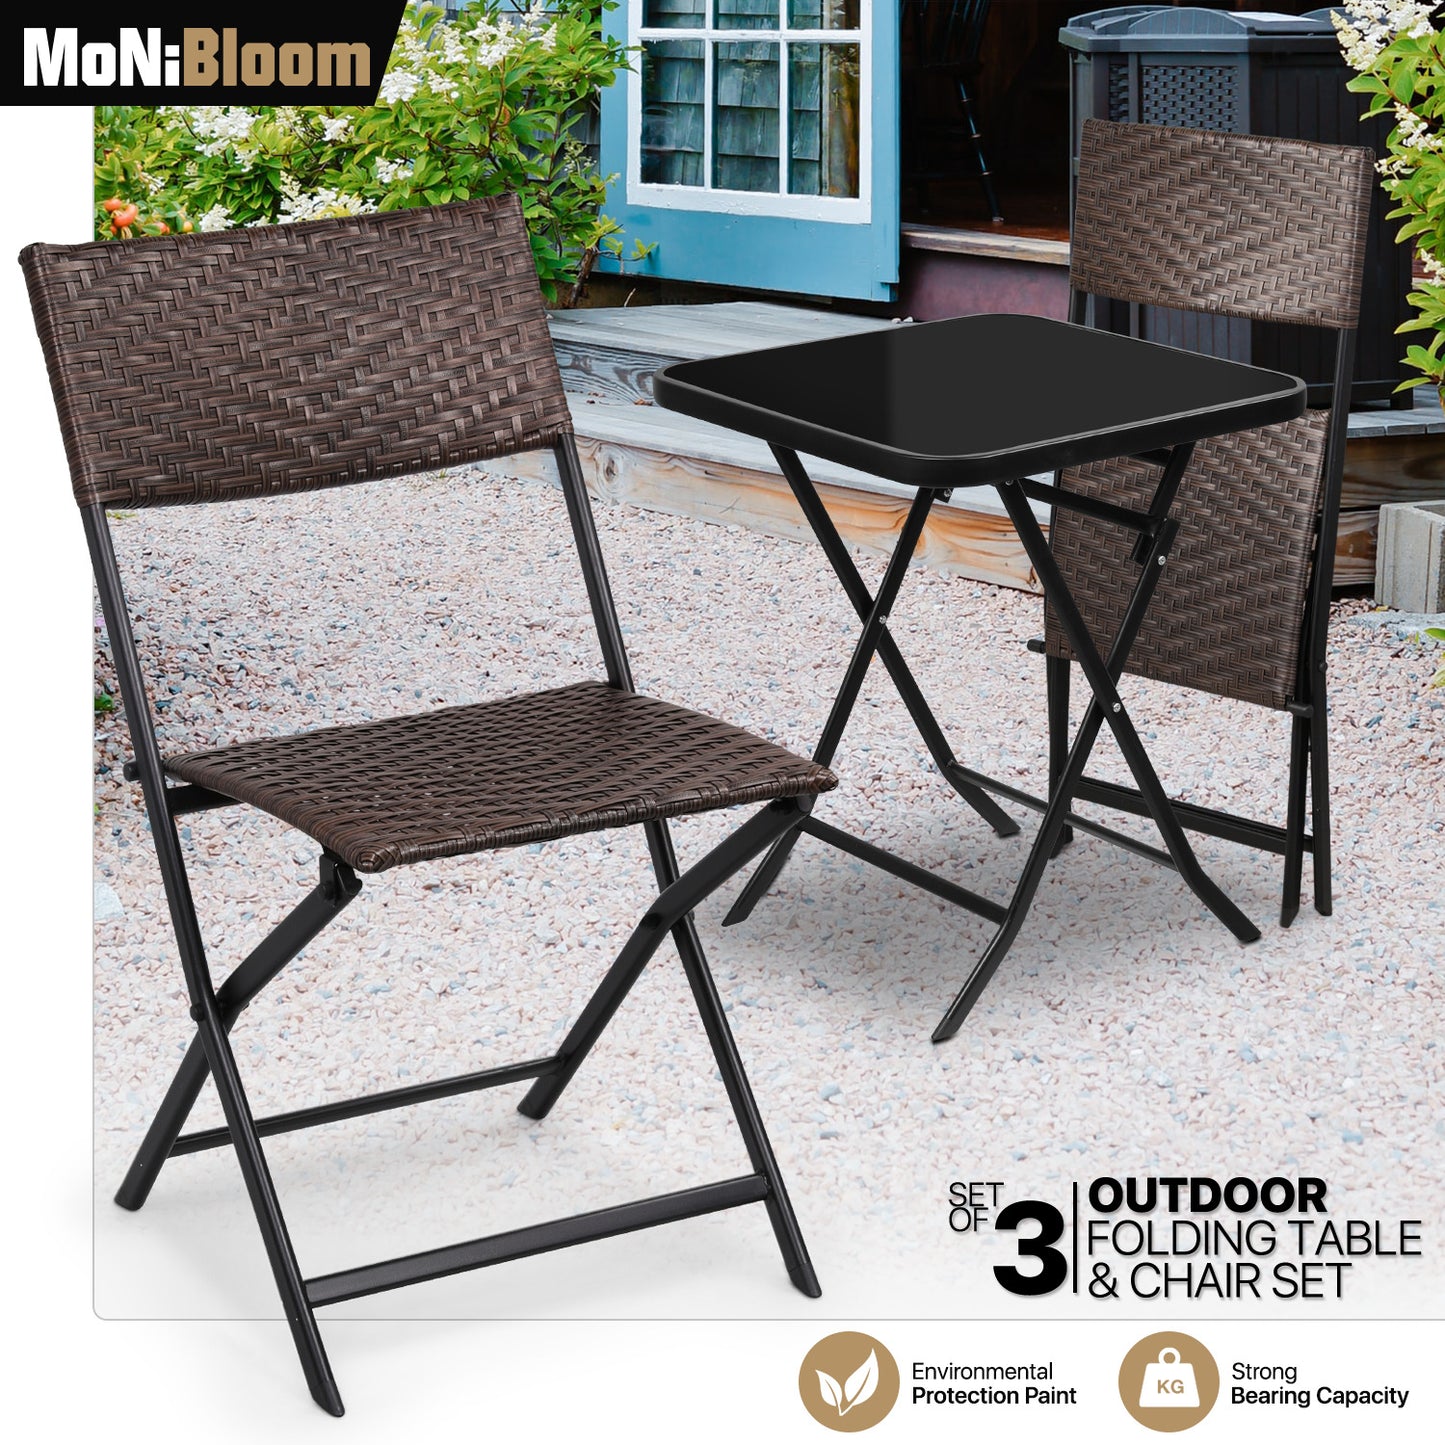 Patio Bistro Set, Tempered Glass Table & 2 Rattan Wicker Chairs